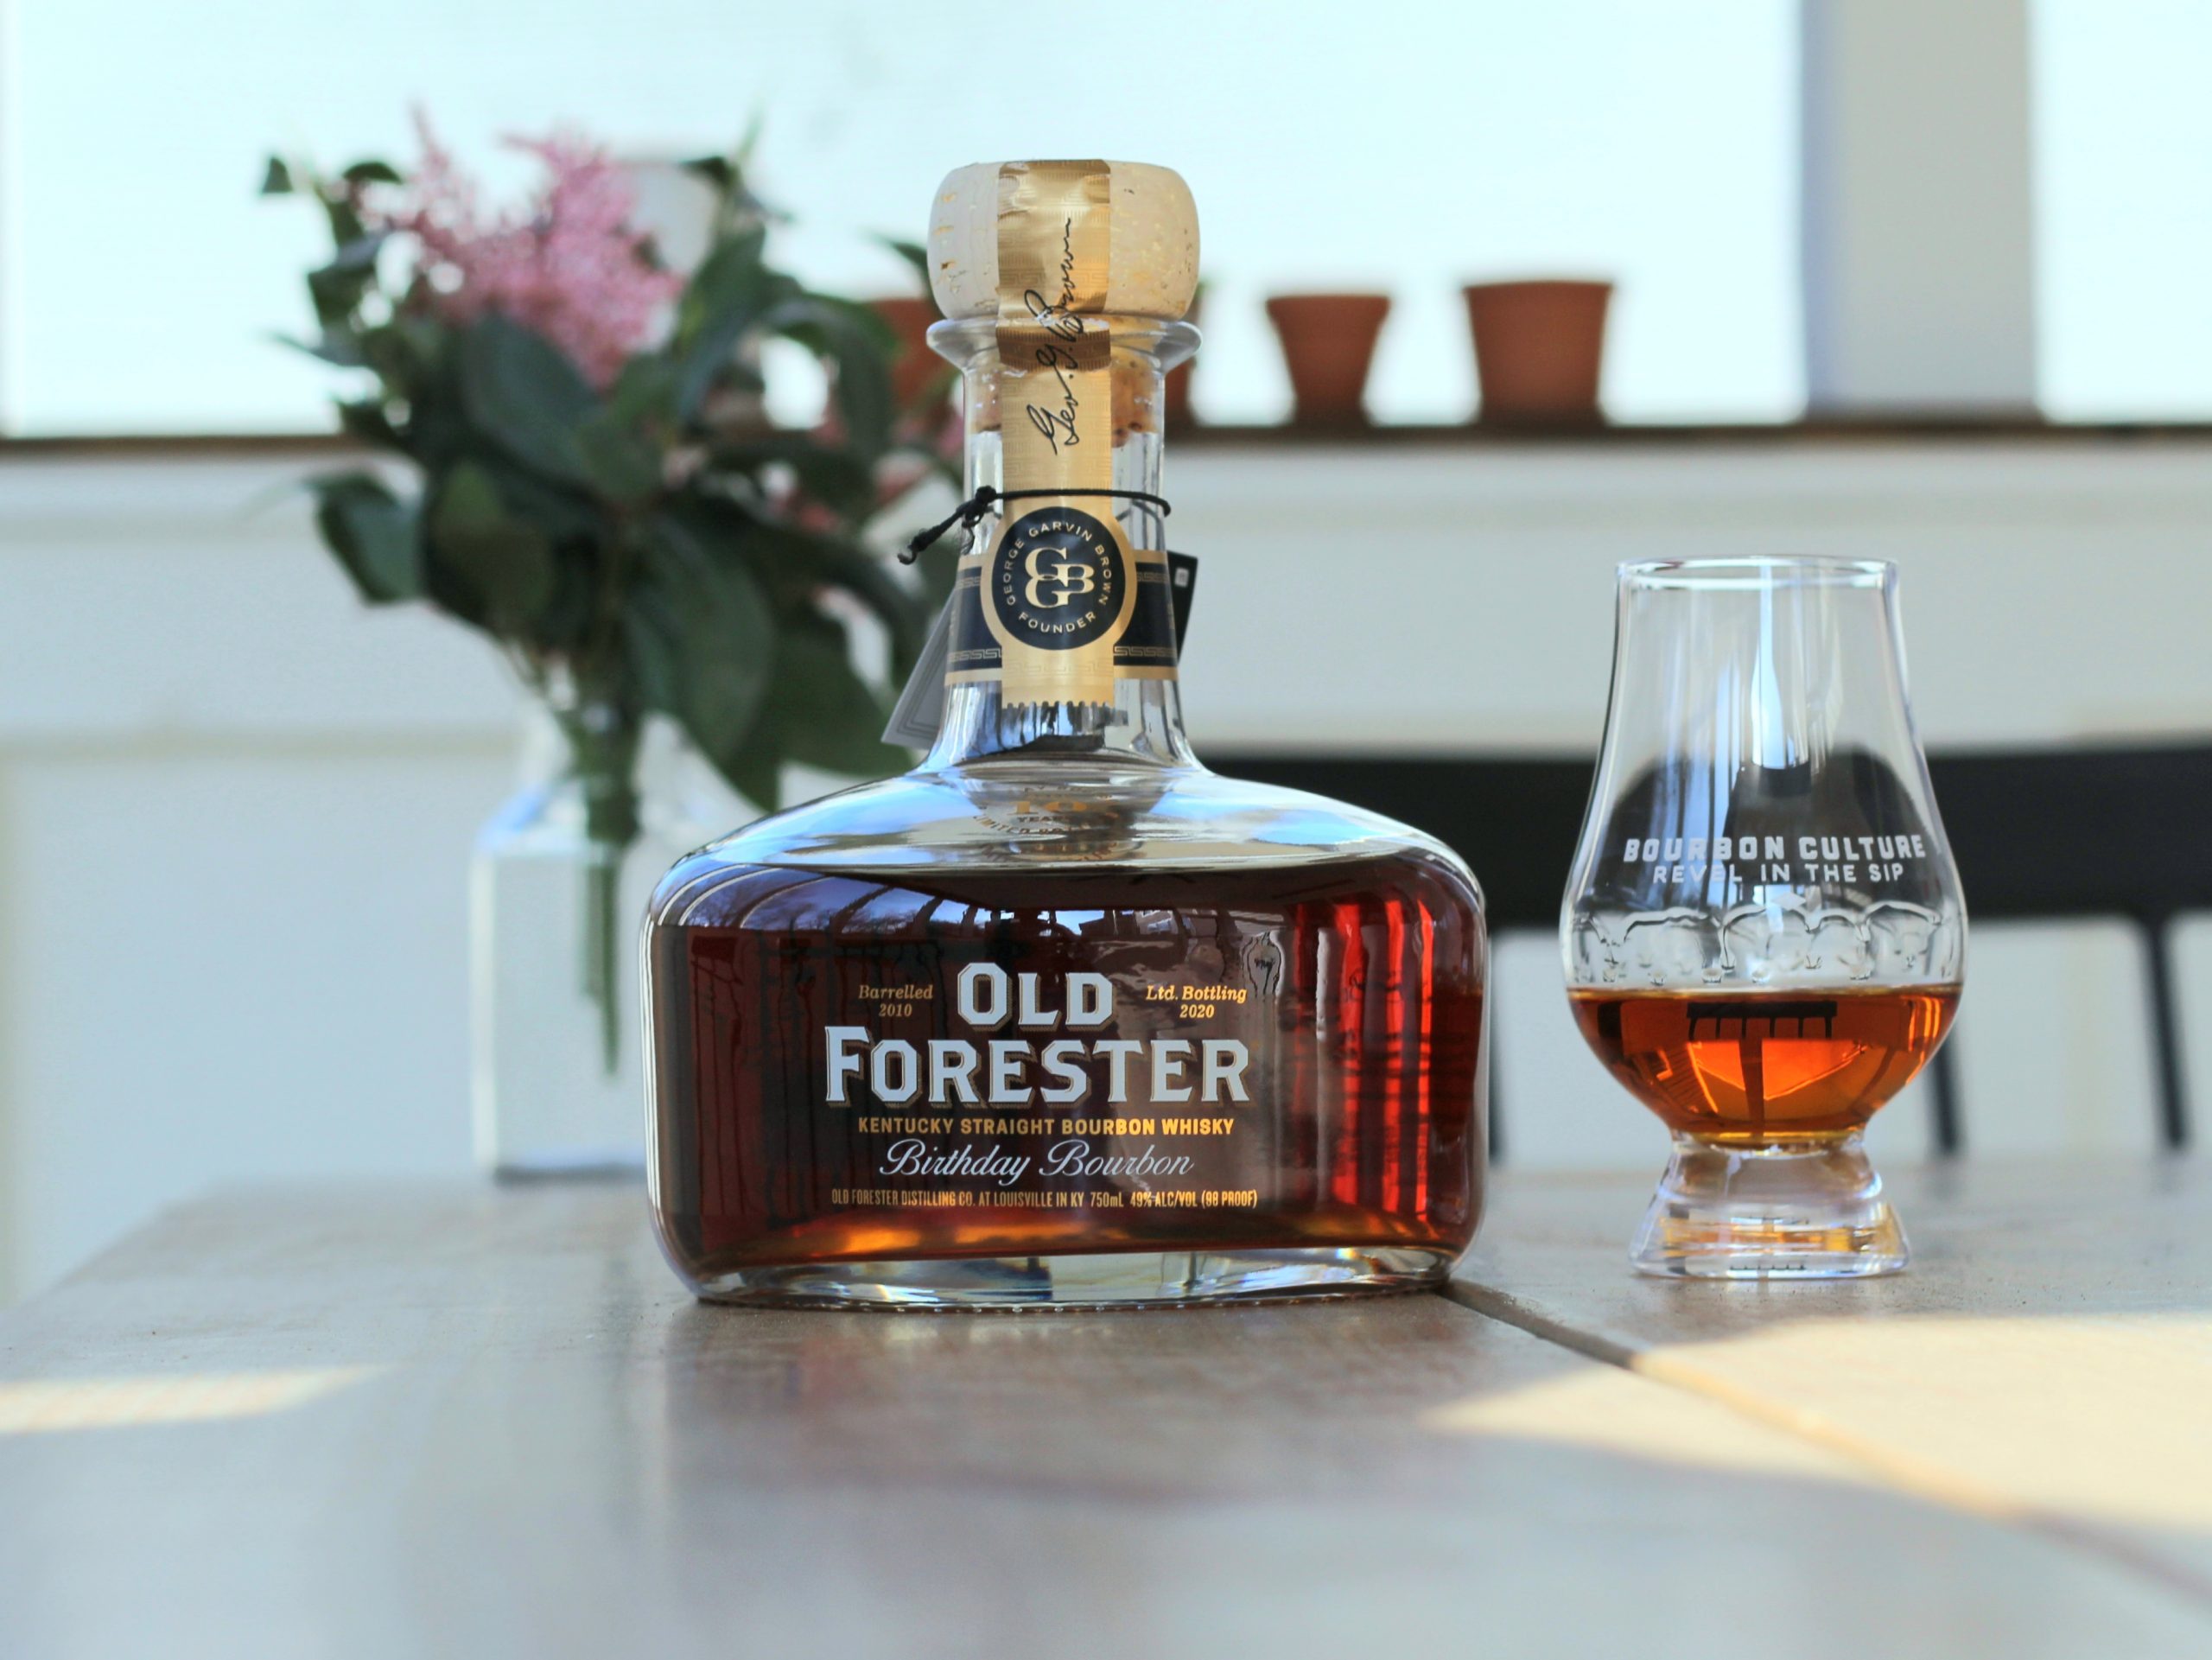 Old Forester Birthday Bourbon 2020 Review